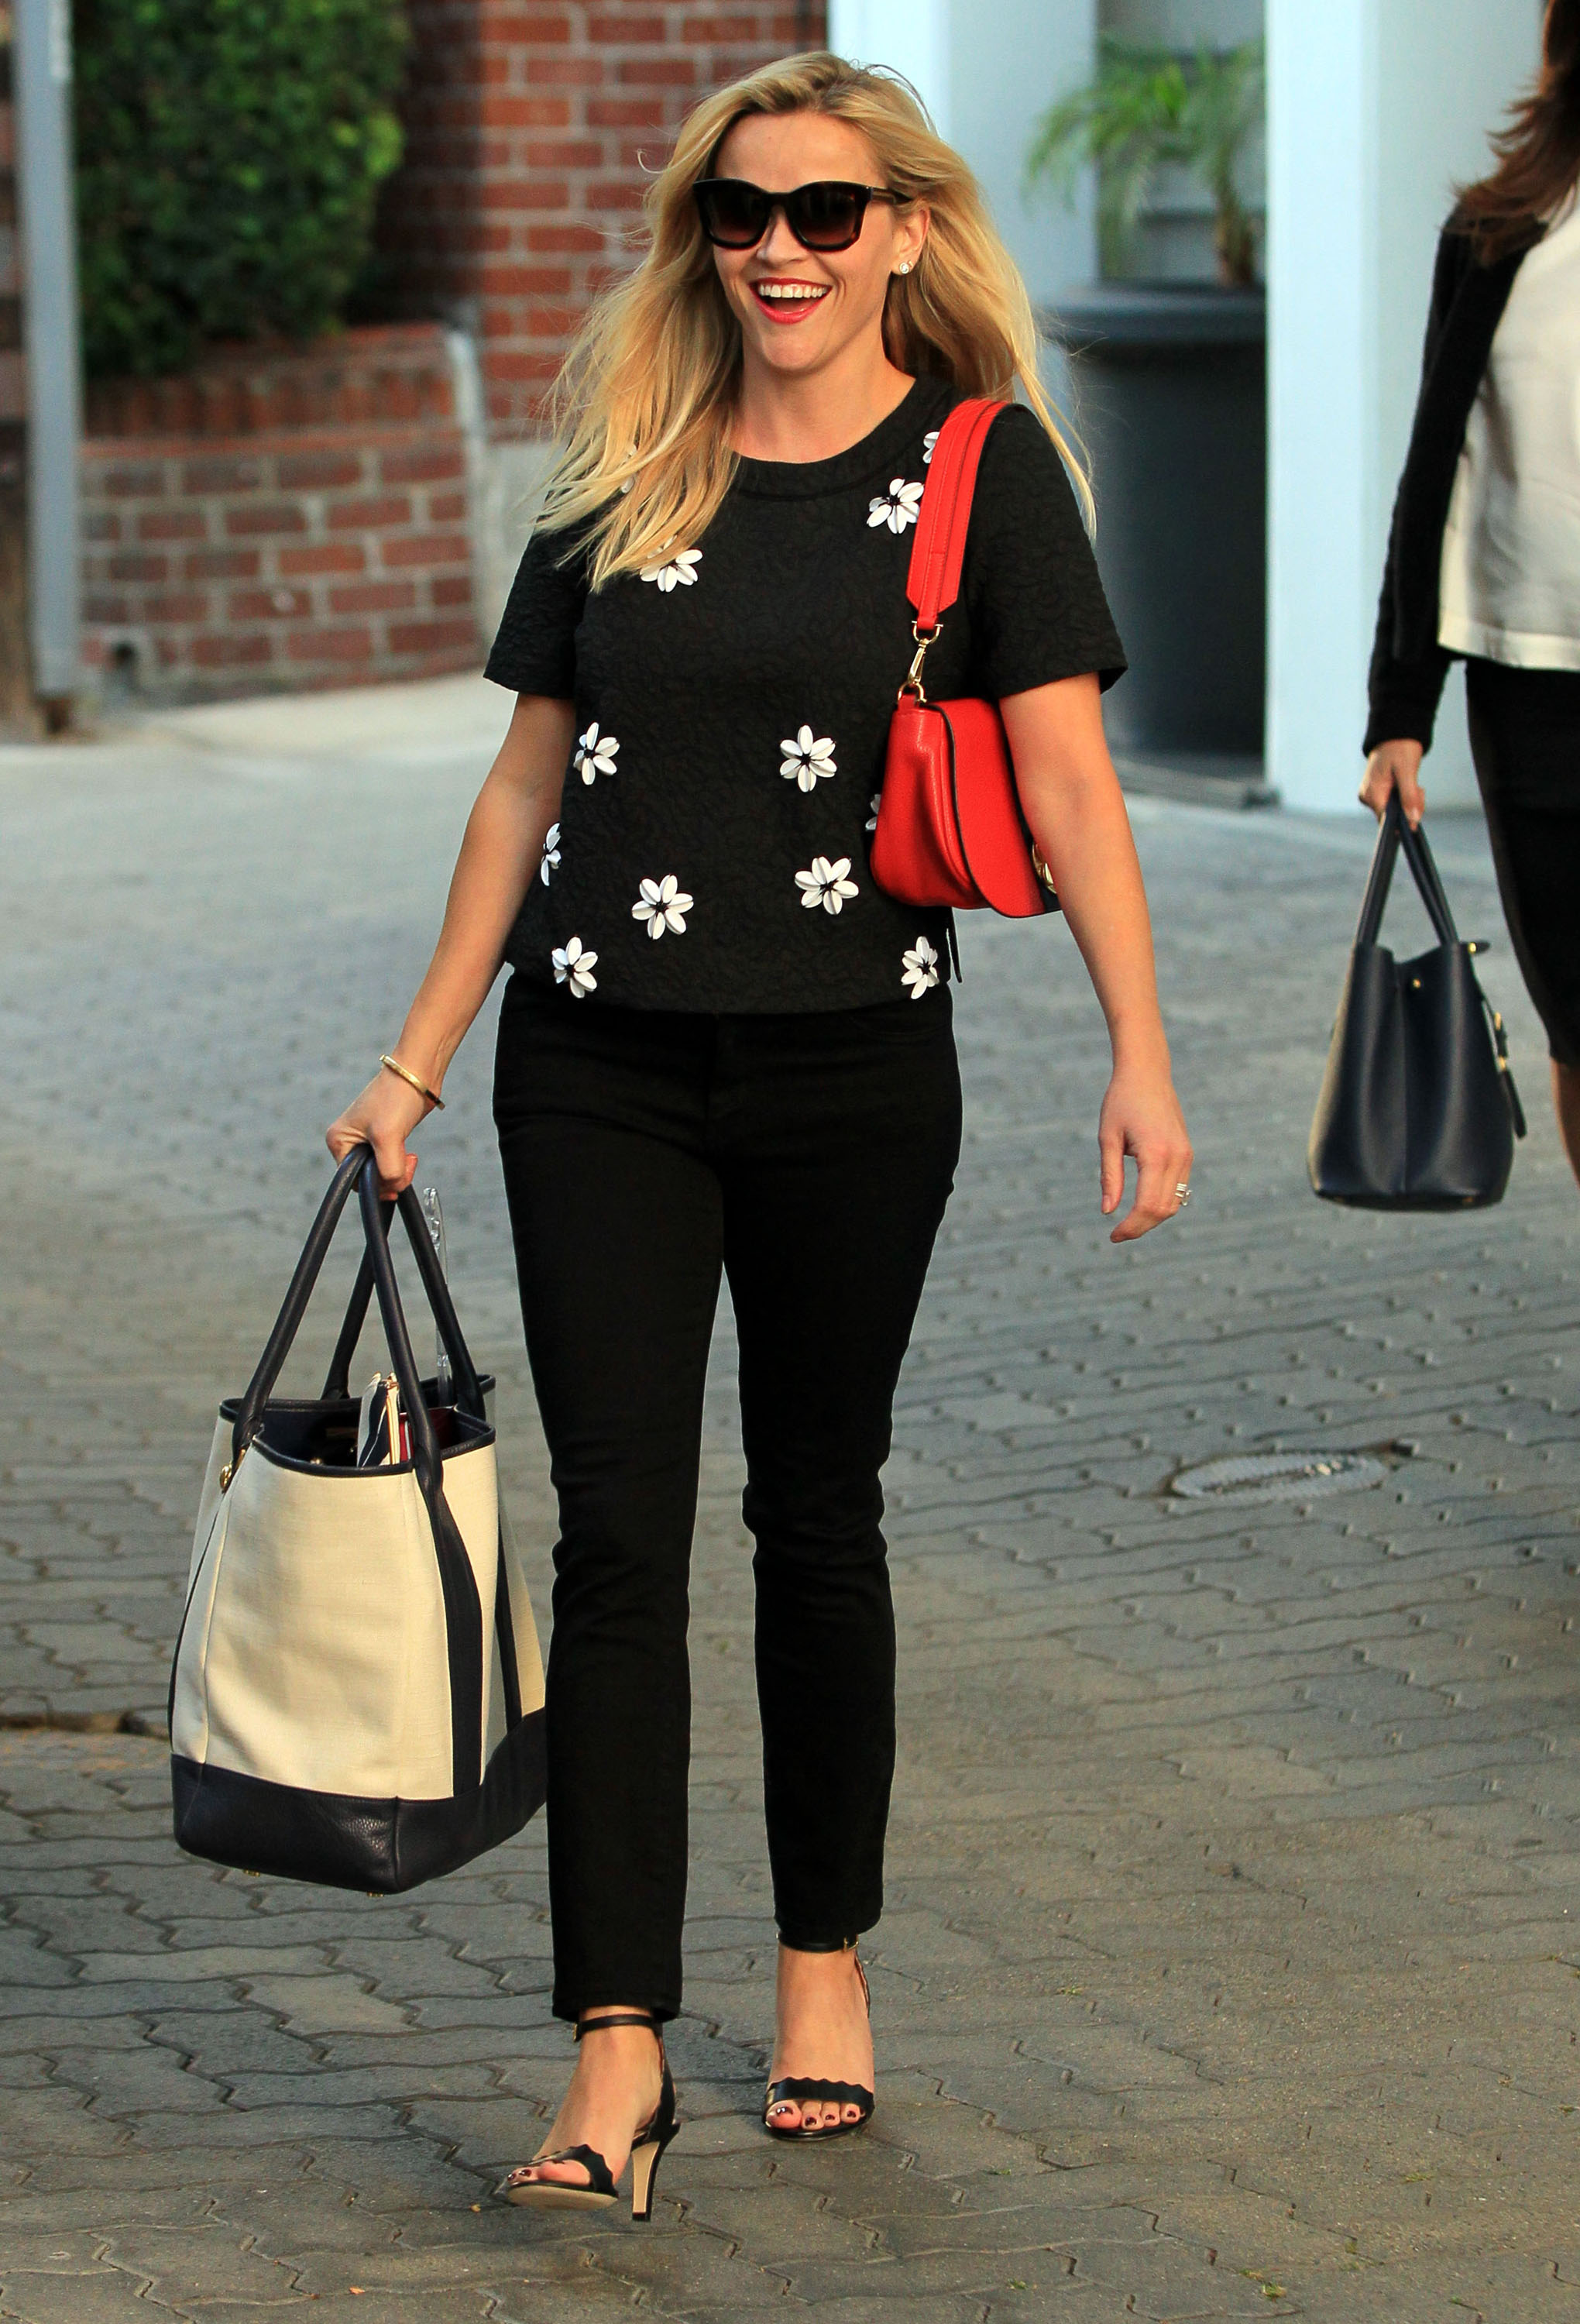 L.L.Bean - StyleBistro spotted Reese Witherspoon with a